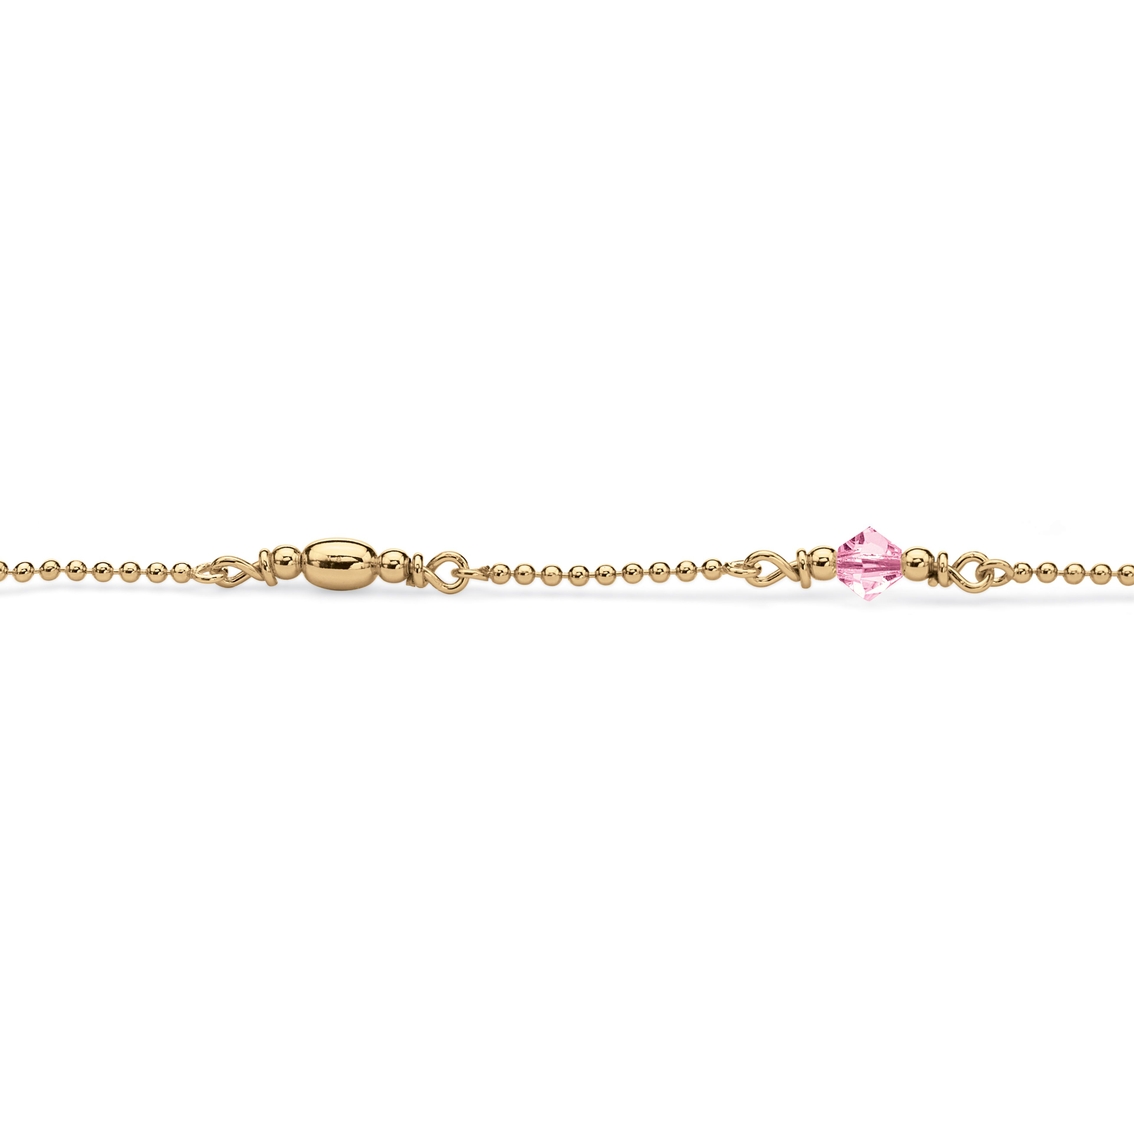 PalmBeach Birthstone Gold-Plated Sterling Silver Ankle Bracelet - Image 2 of 4